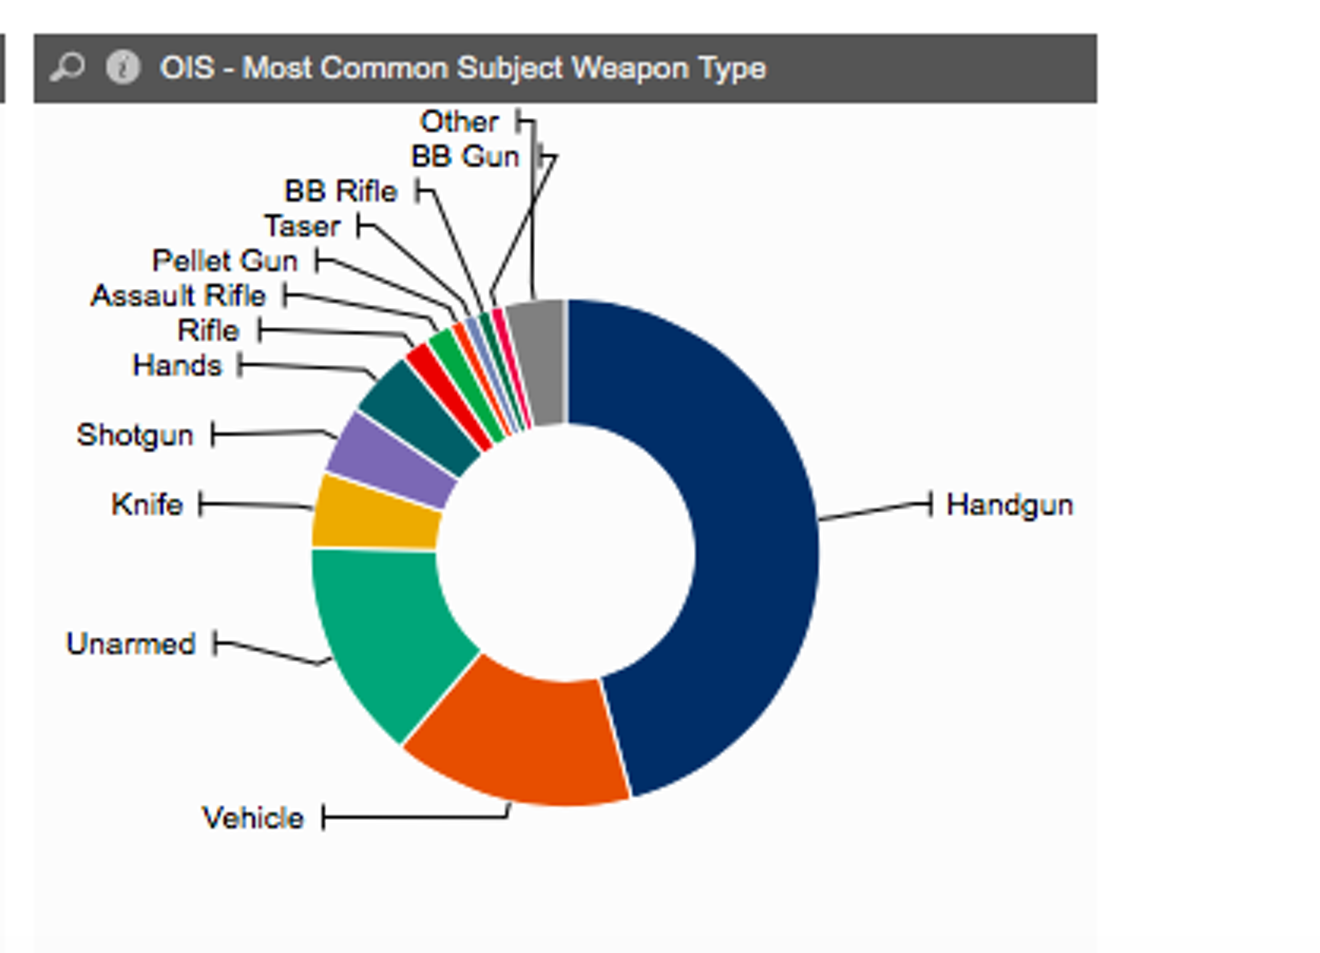 Police involved shootings often involve a suspect using a vehicle in a threatening manner, according to DPD data.